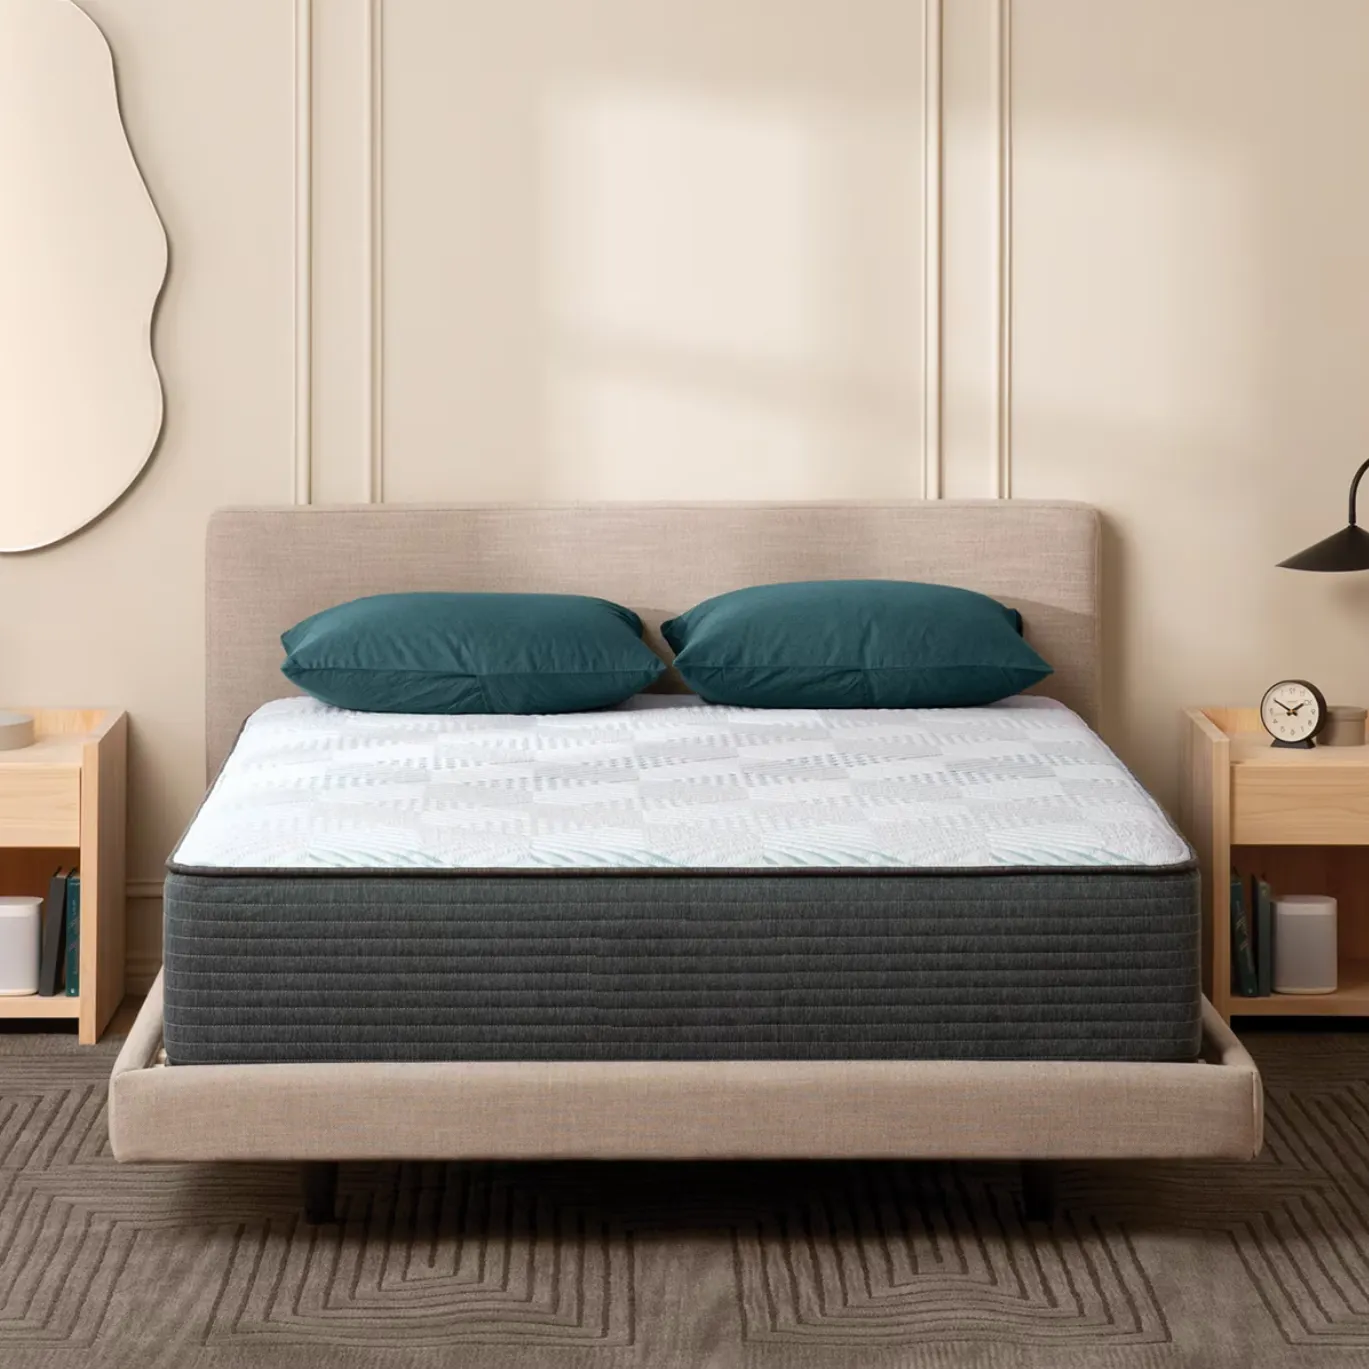 Luxury Comfortable Queen King Size Hybrid Independent Pocketed Spring Bed Mattress With Memory Foam Mattress In a Box